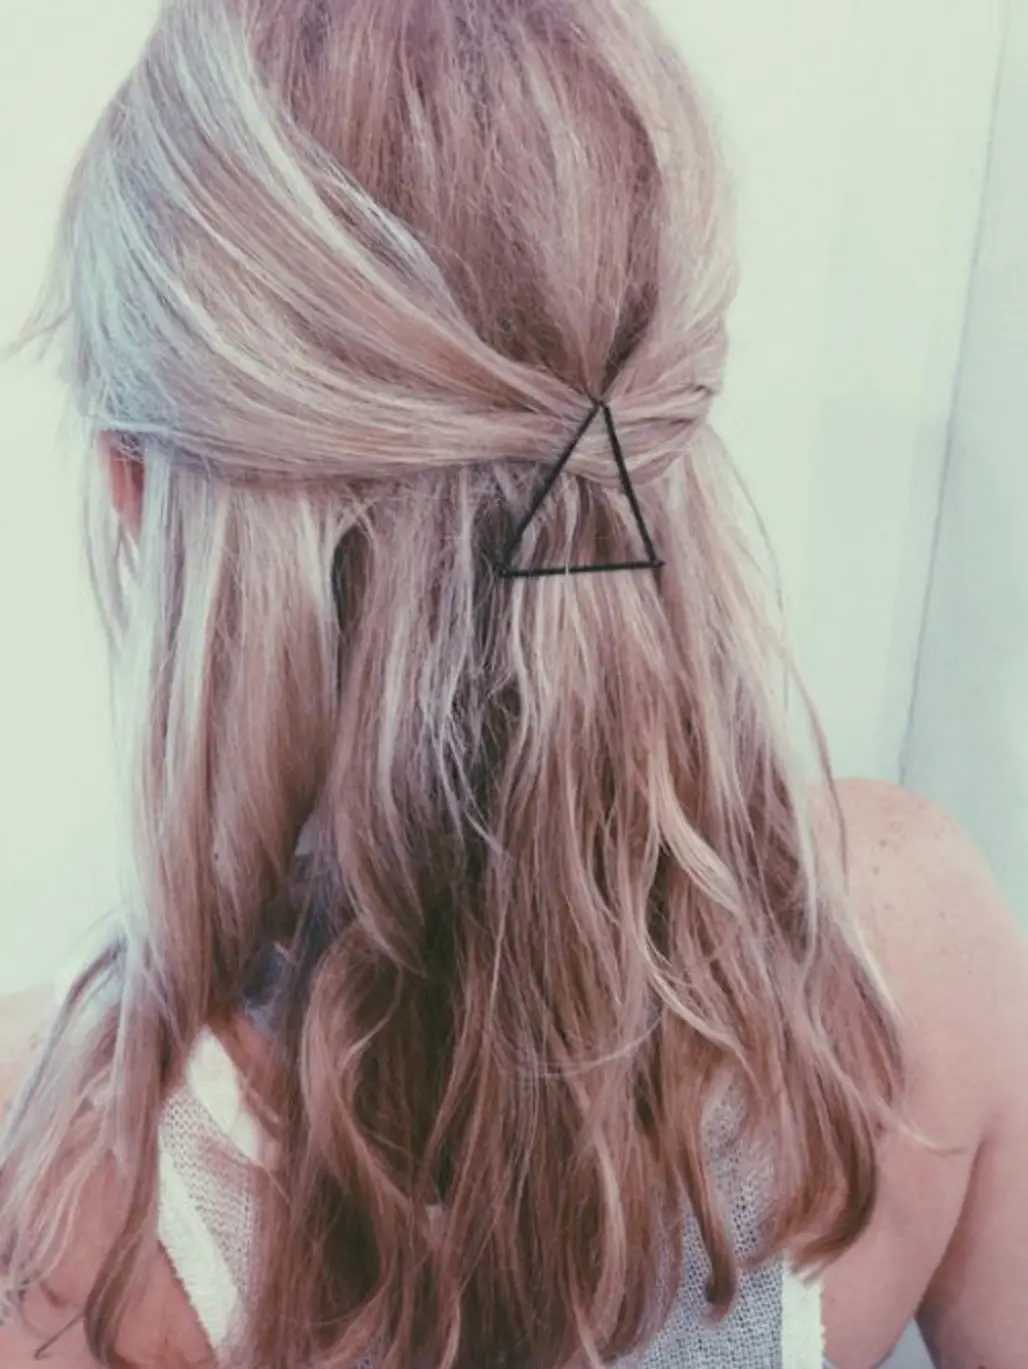 Get Creative with 3 Bobby Pins